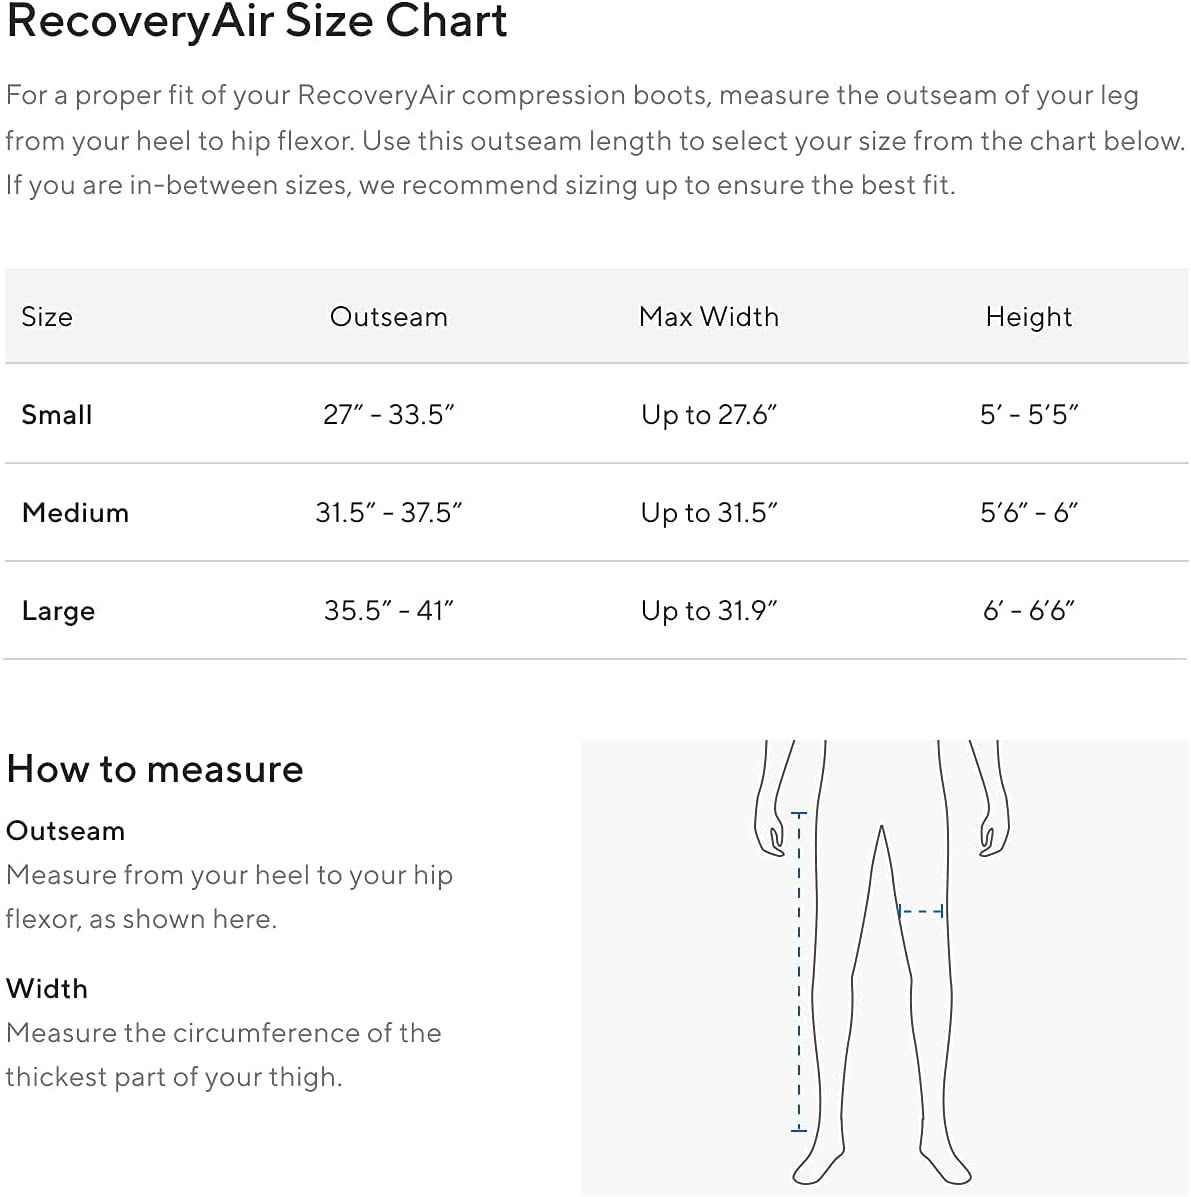 DISCTherabody - RecoveryAir Compression System - Small